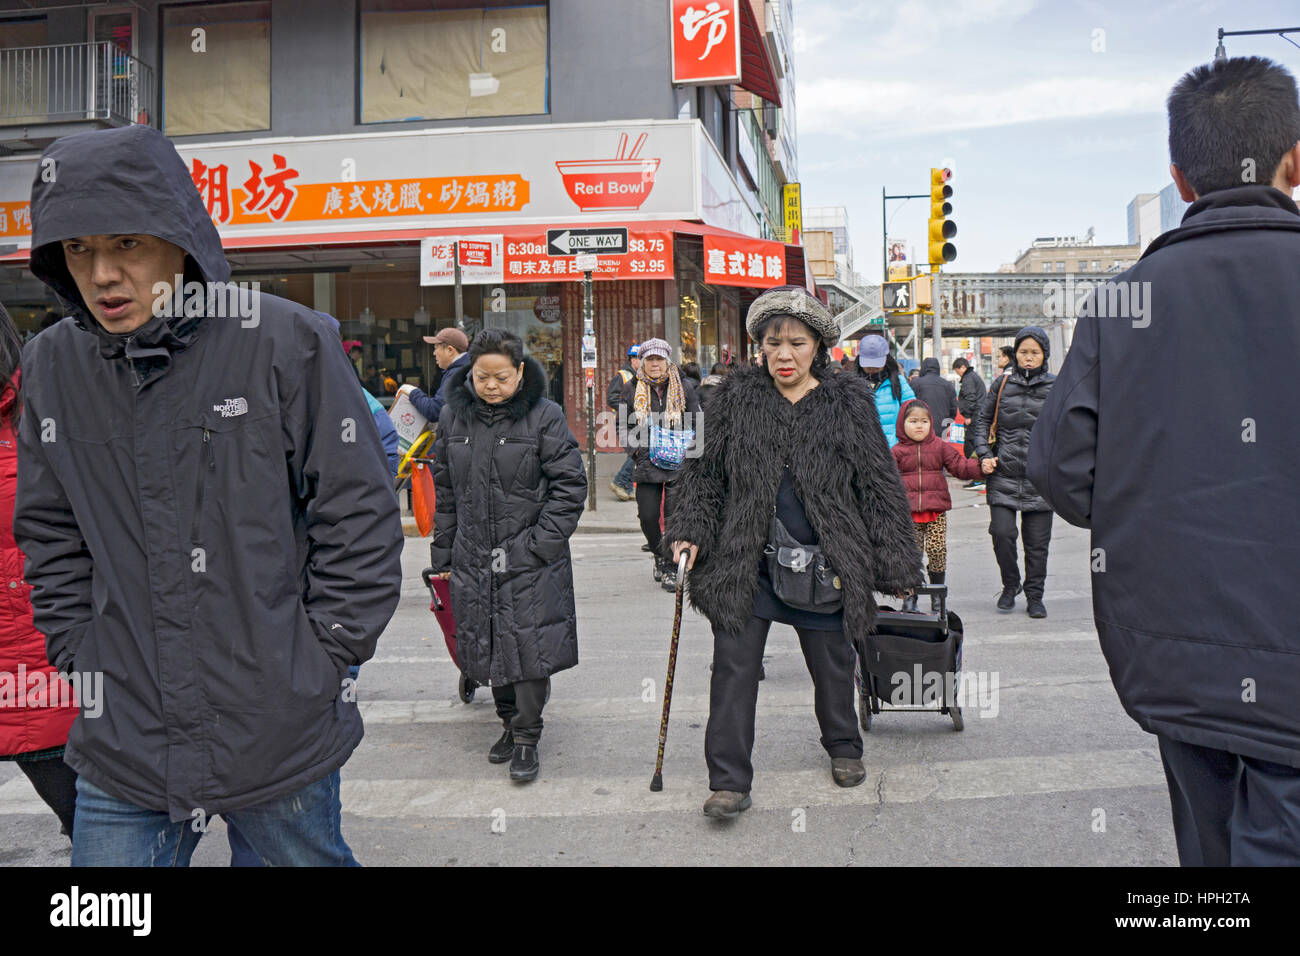 An Asian woman with a cane wearing contemporary clothes crossing a street in Chinatown, Flushing, New York City Stock Photo